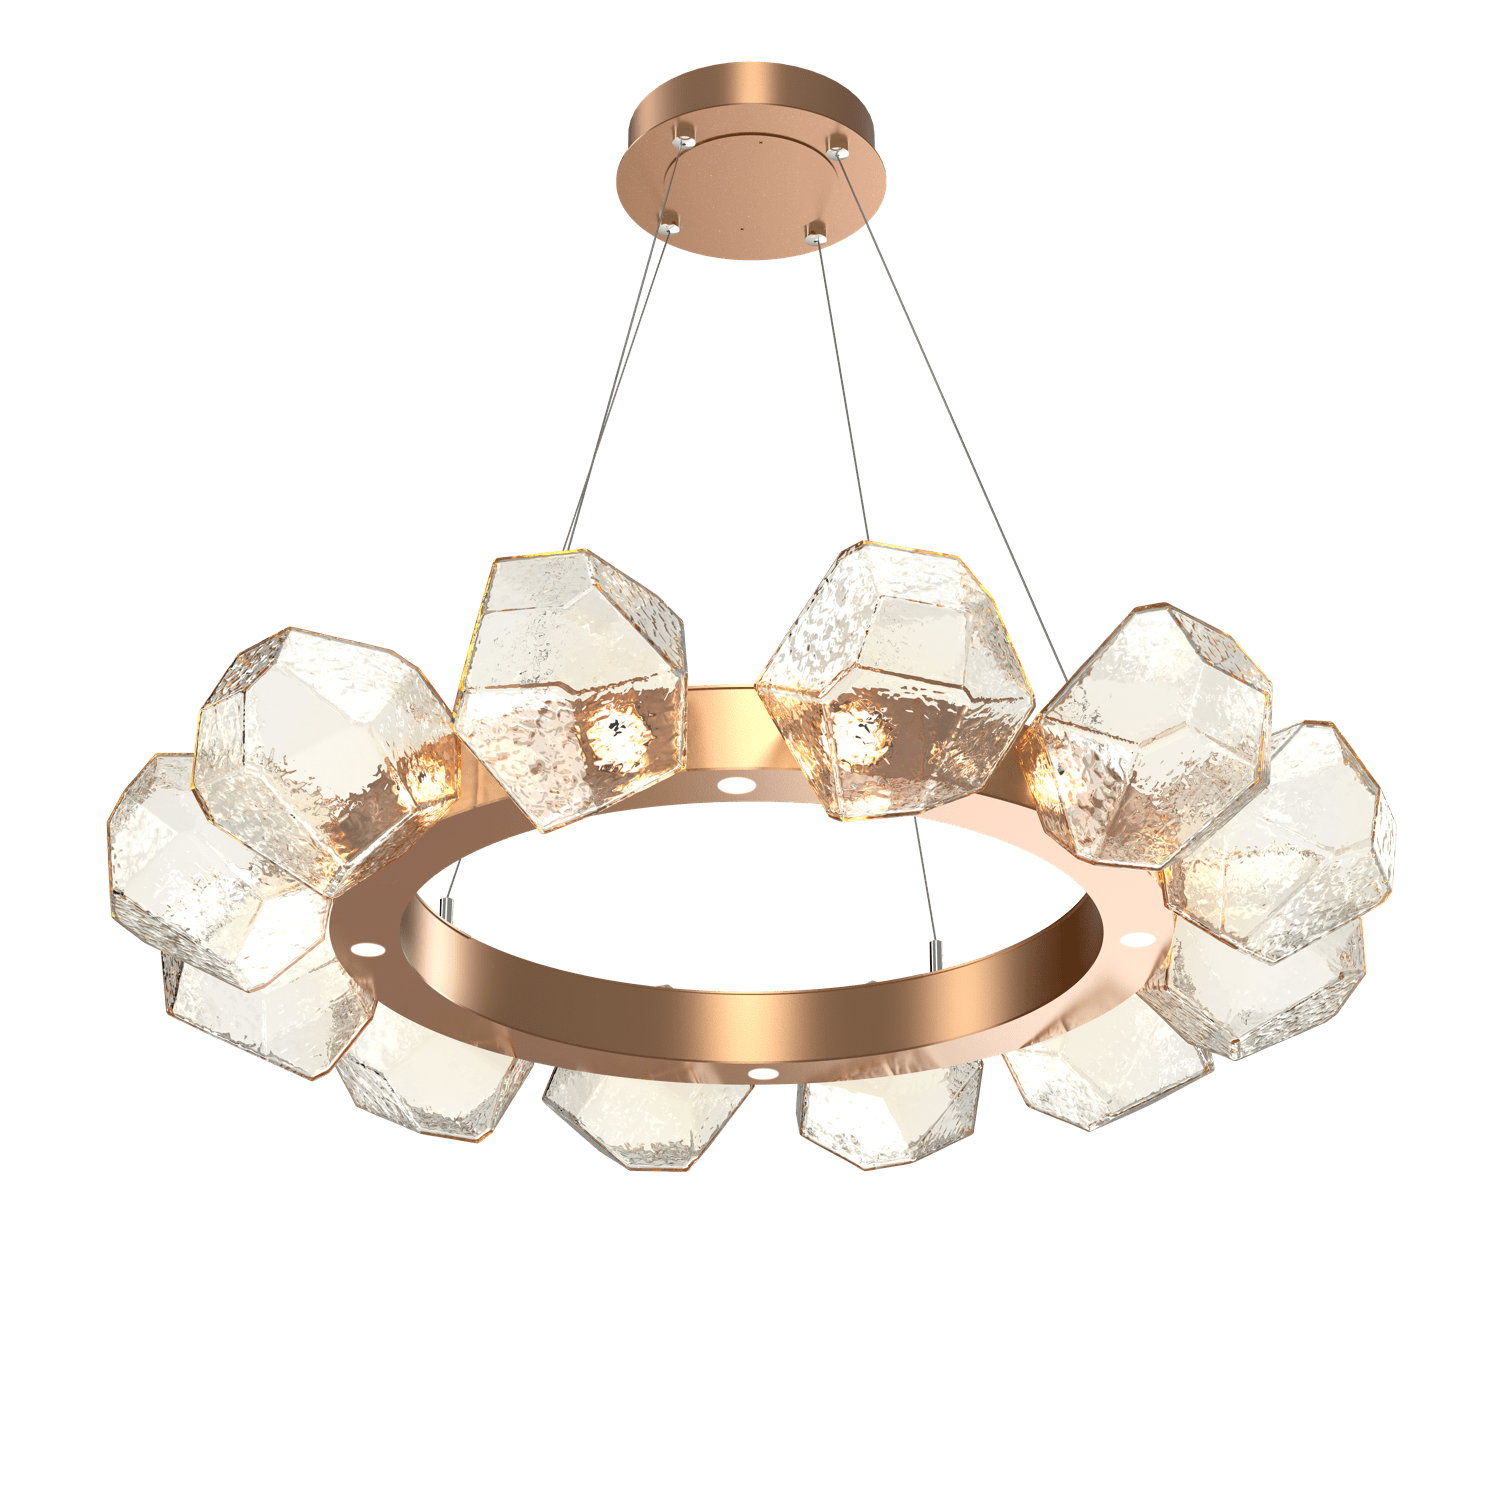 CHB0039-36-NB-A-Hammerton-Studio-Gem-36-inch-radial-ring-chandelier-with-novel-brass-finish-and-amber-blown-glass-shades-and-LED-lamping